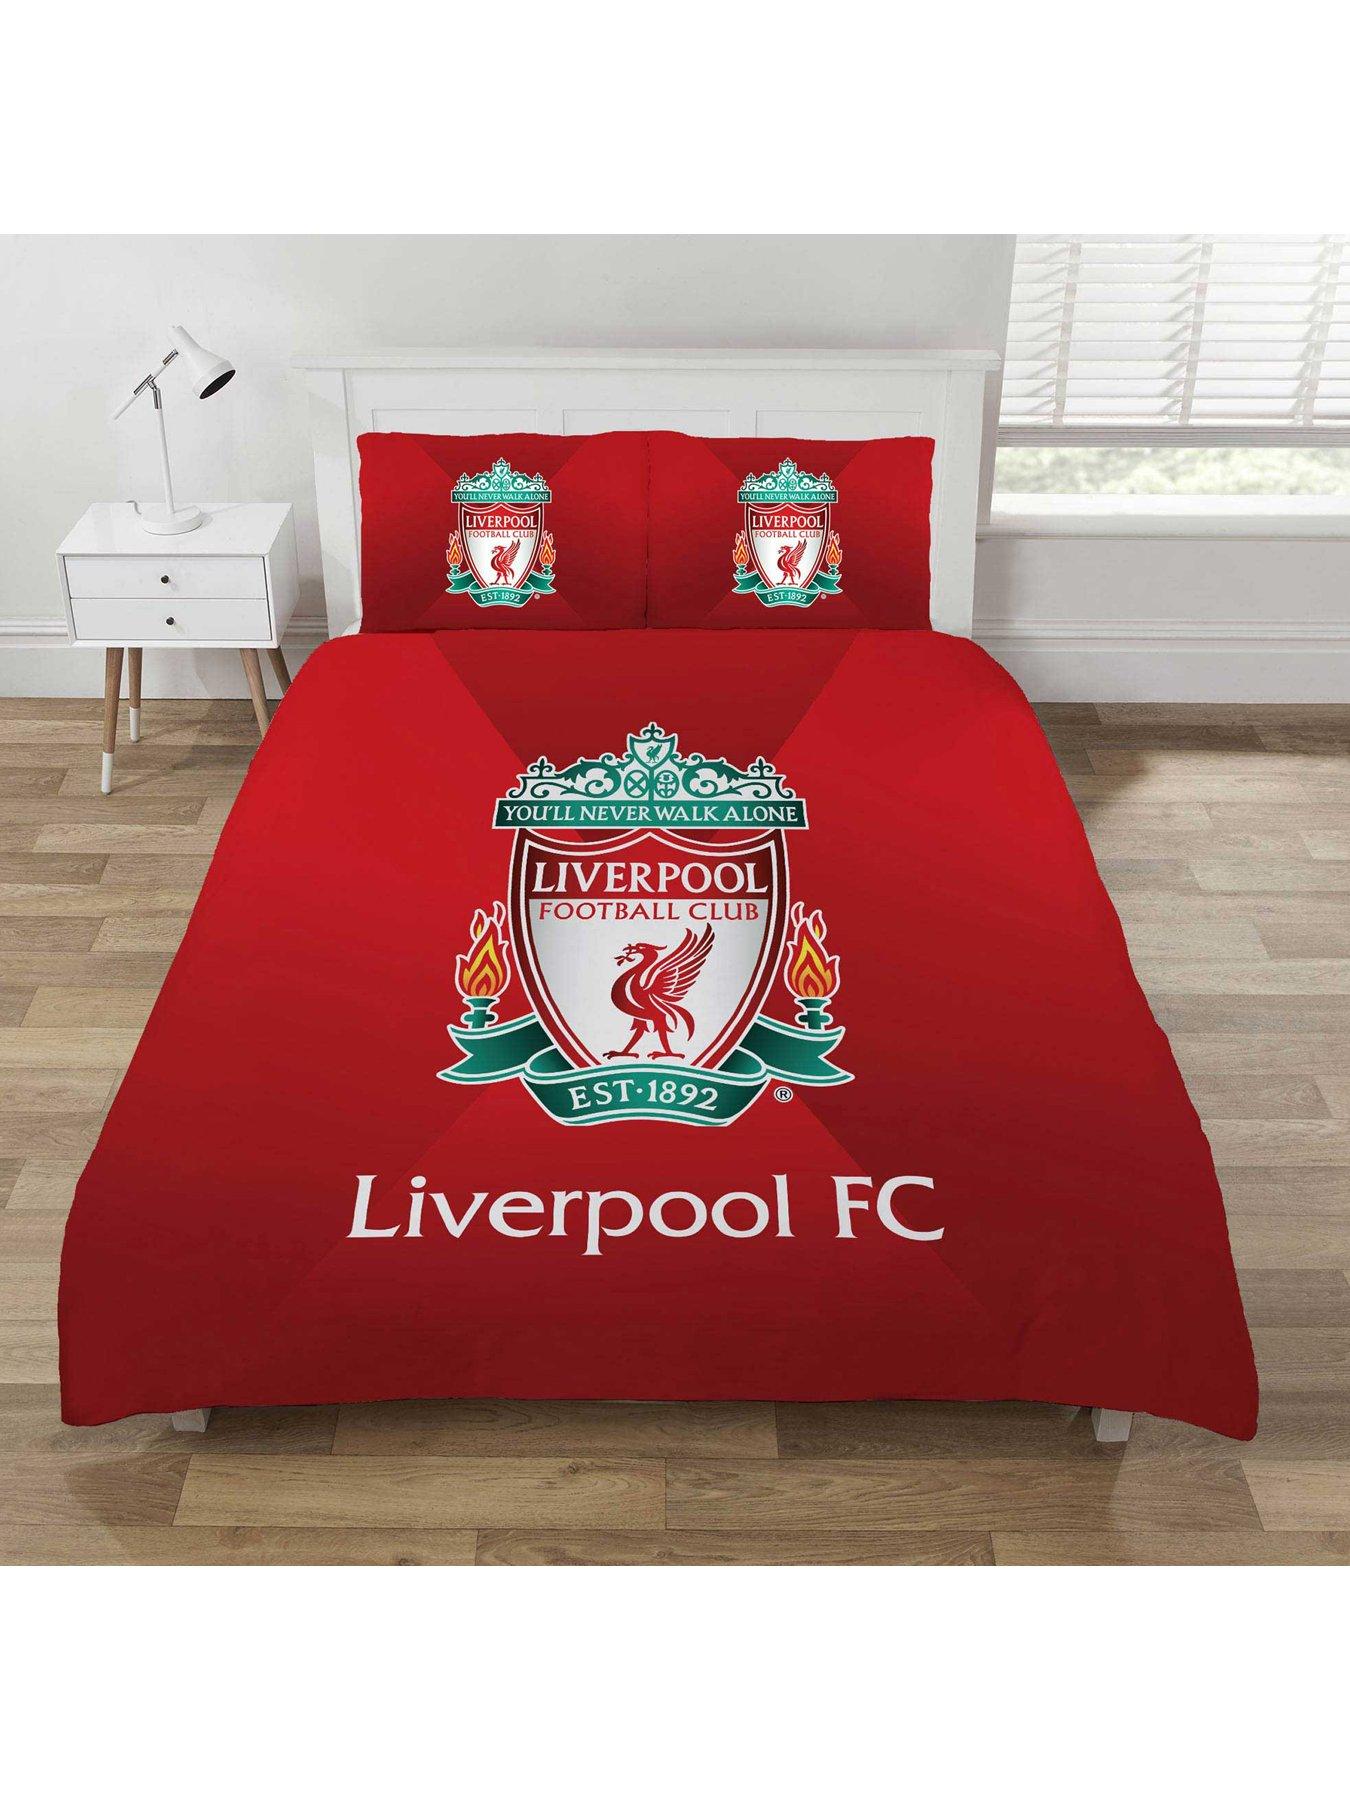 Liverpool F.c Bedroom Lamp Official Merchandise Fc Football Licensed Product 